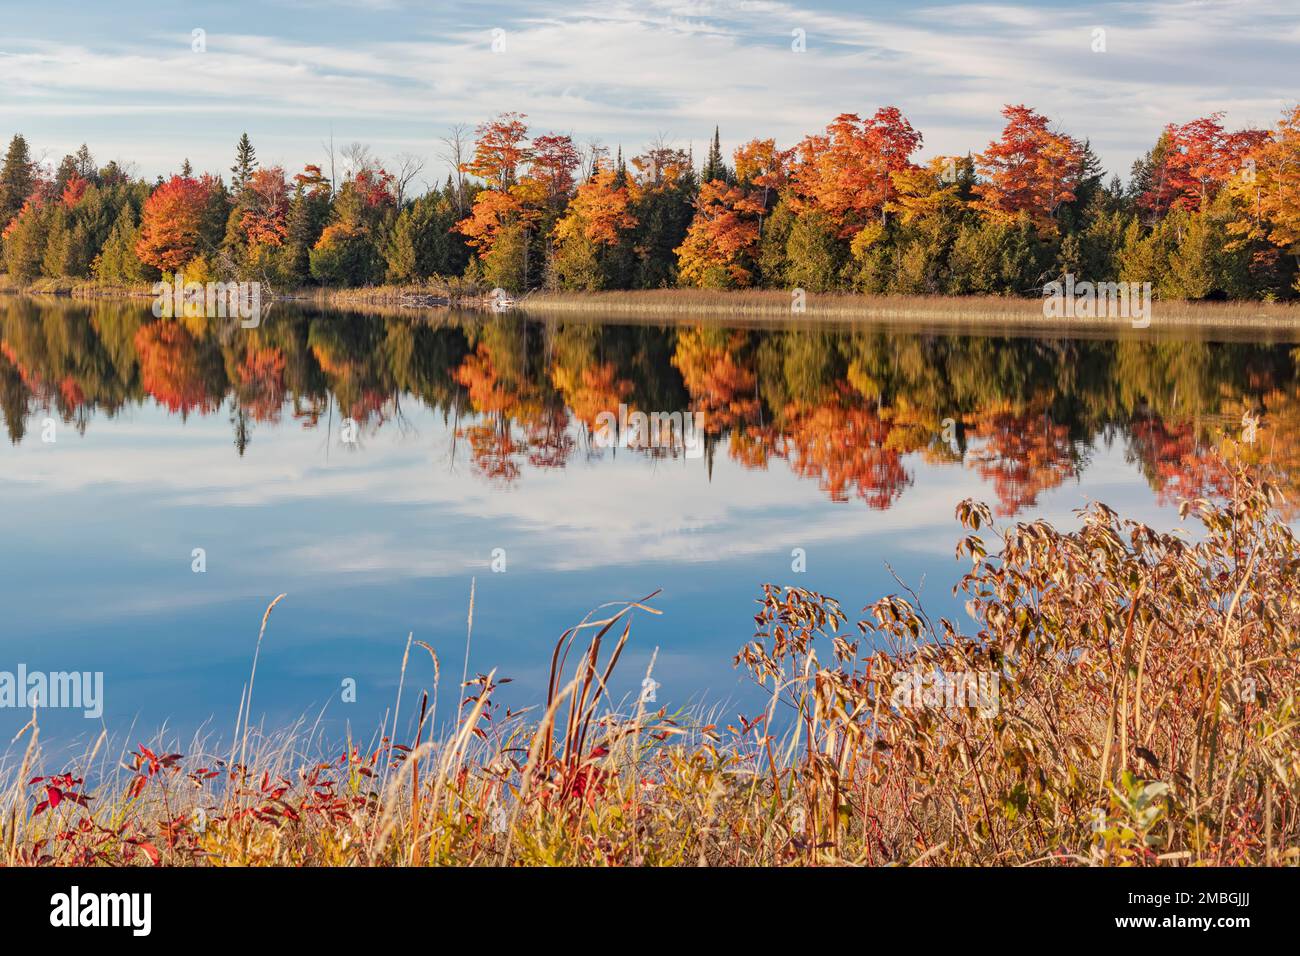 The tree line in the background creates gorgeous autumn reflections in the waters of Nineteen Lake, on Manitoulin Island, Ontario, Canada. Stock Photo